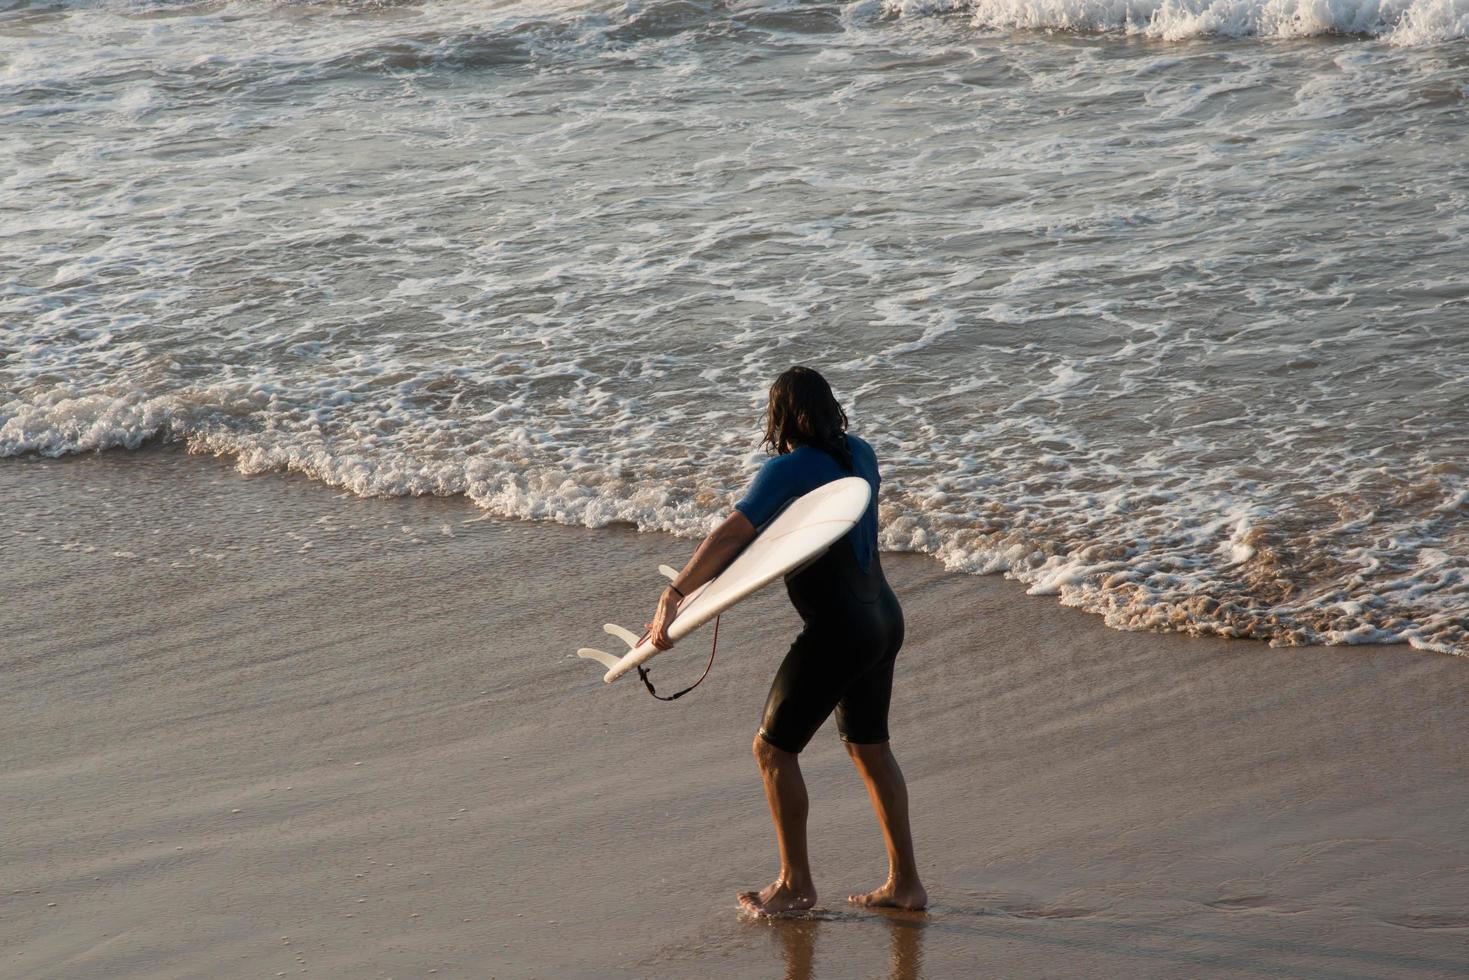 Surfer coming out of the sea with his board. Gijon beach, Asturias, Spain photo